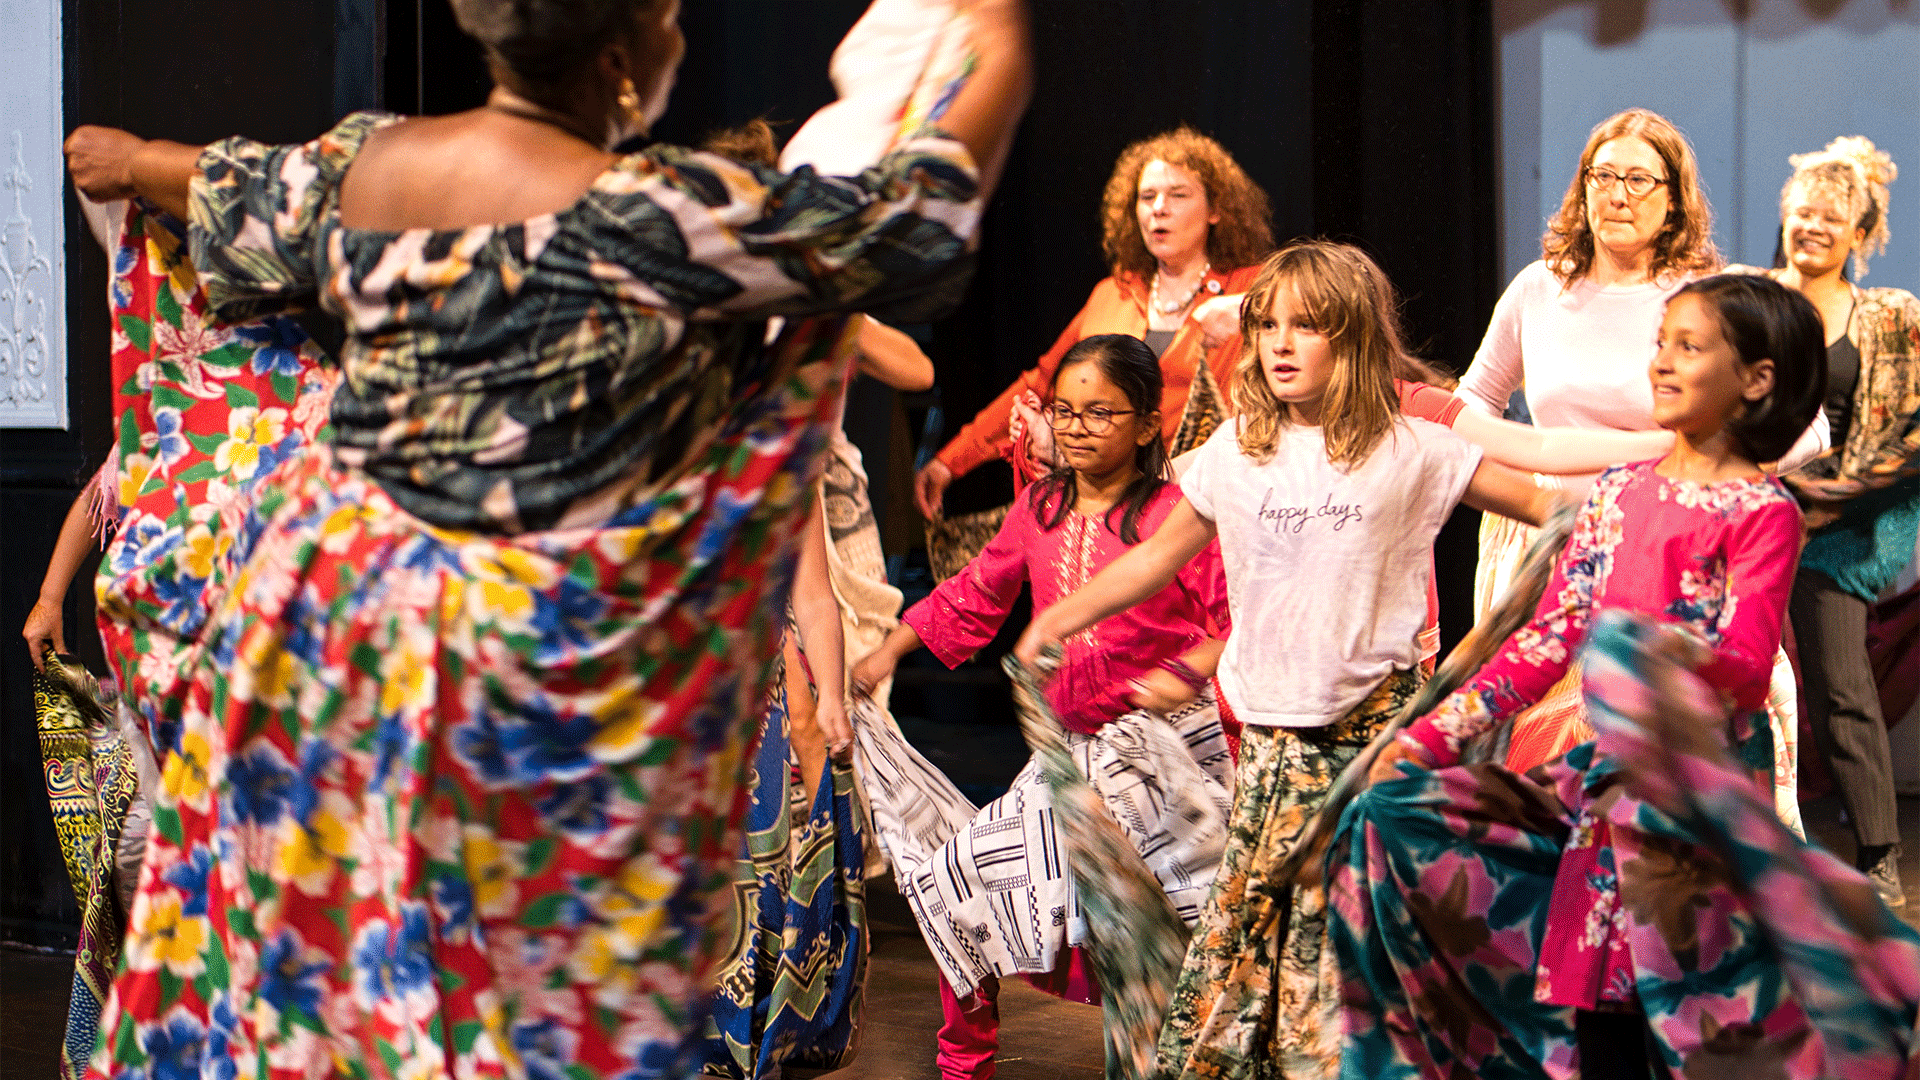 A woman holding colourful fabric behind her raises her arms in front of a group of children and adults, who are also holding fabric and raising their arms.